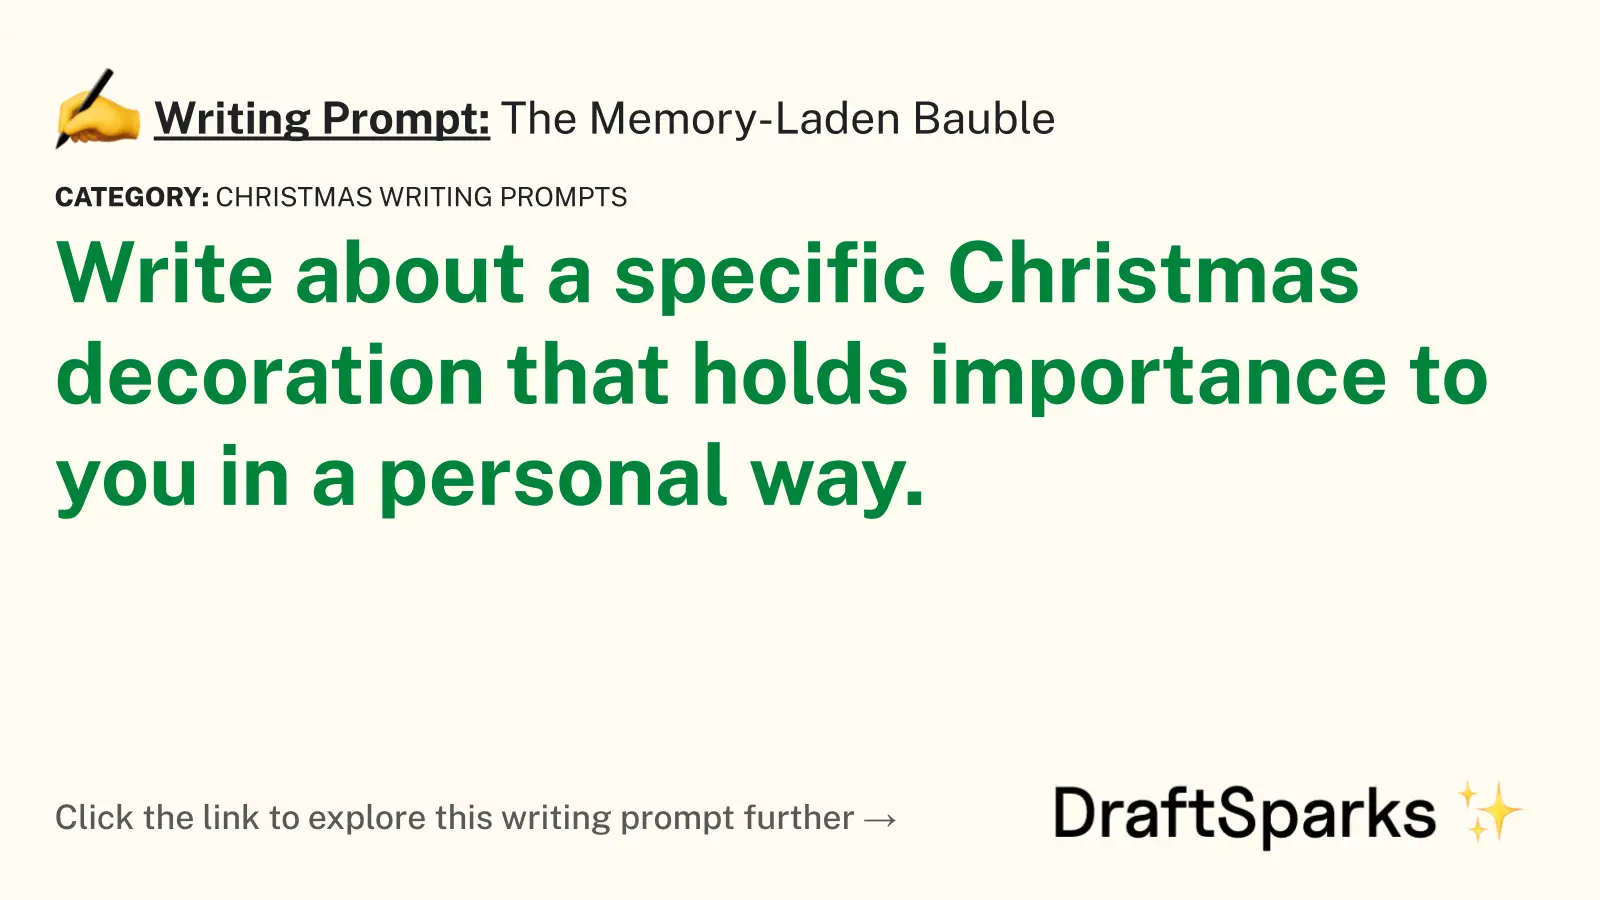 The Memory-Laden Bauble